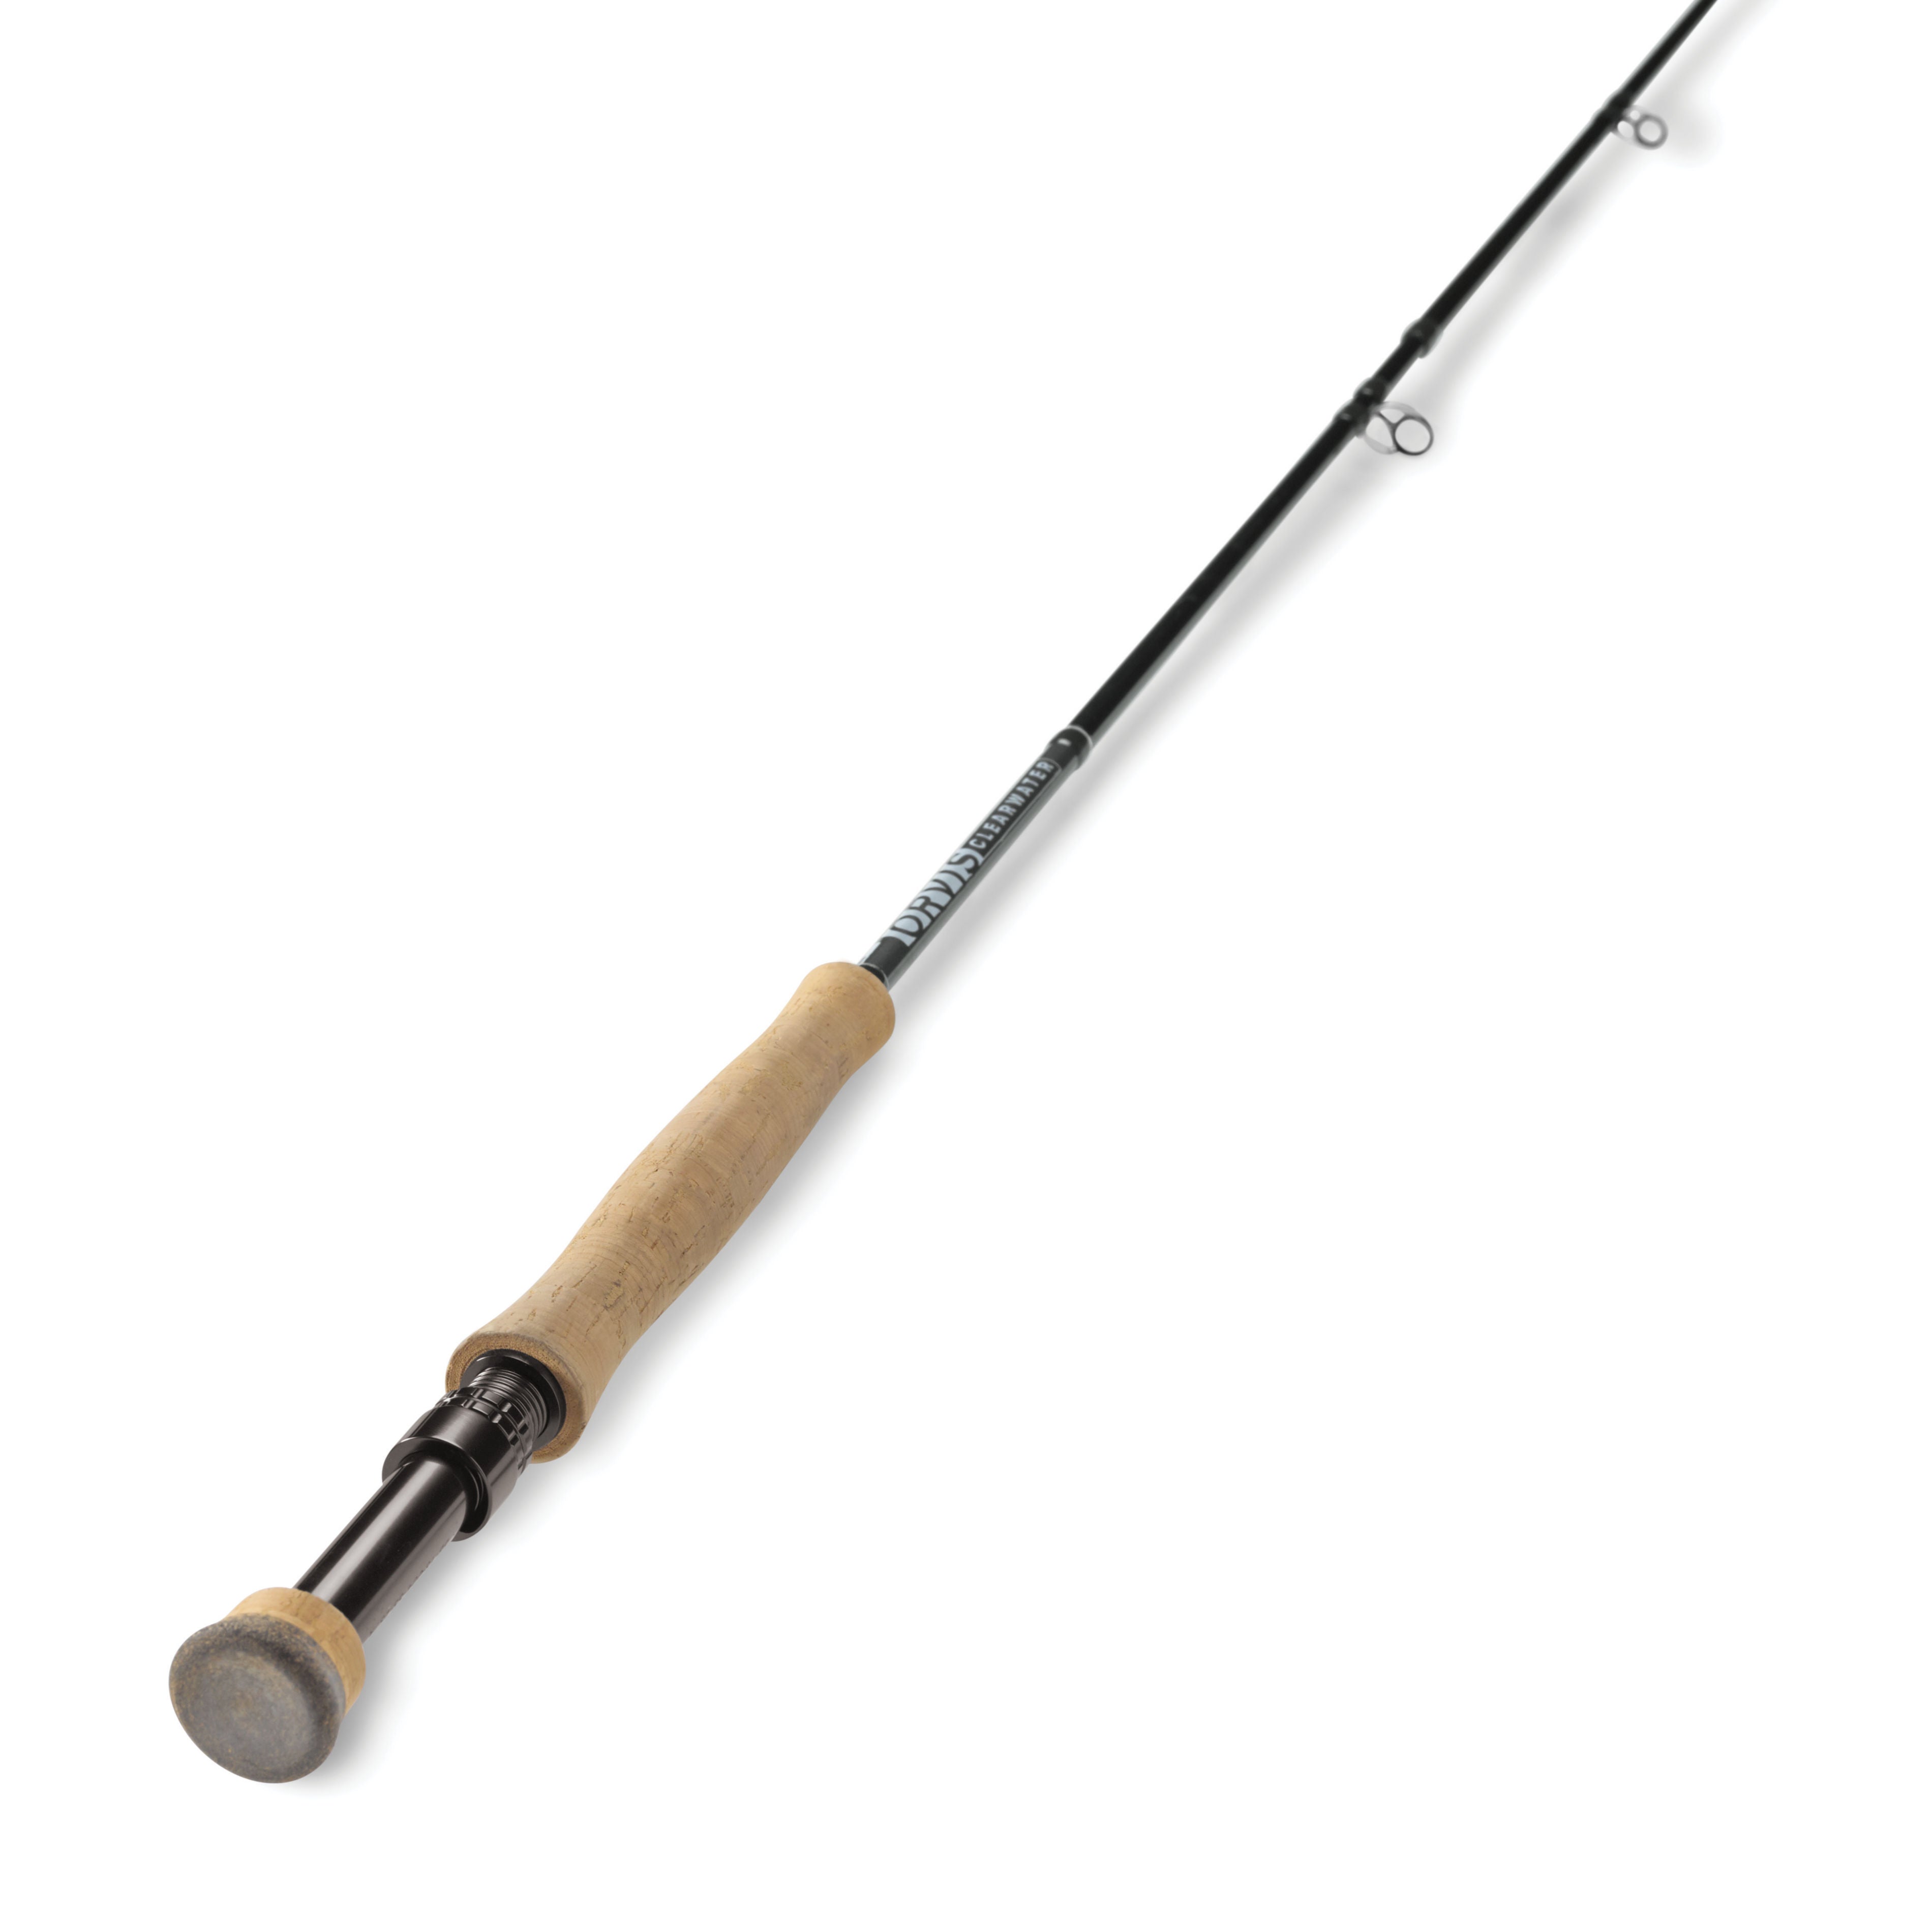 Clearwater® 10' 2-Weight Fly Rod | Shop Fly Fishing Rods | Orvis UK